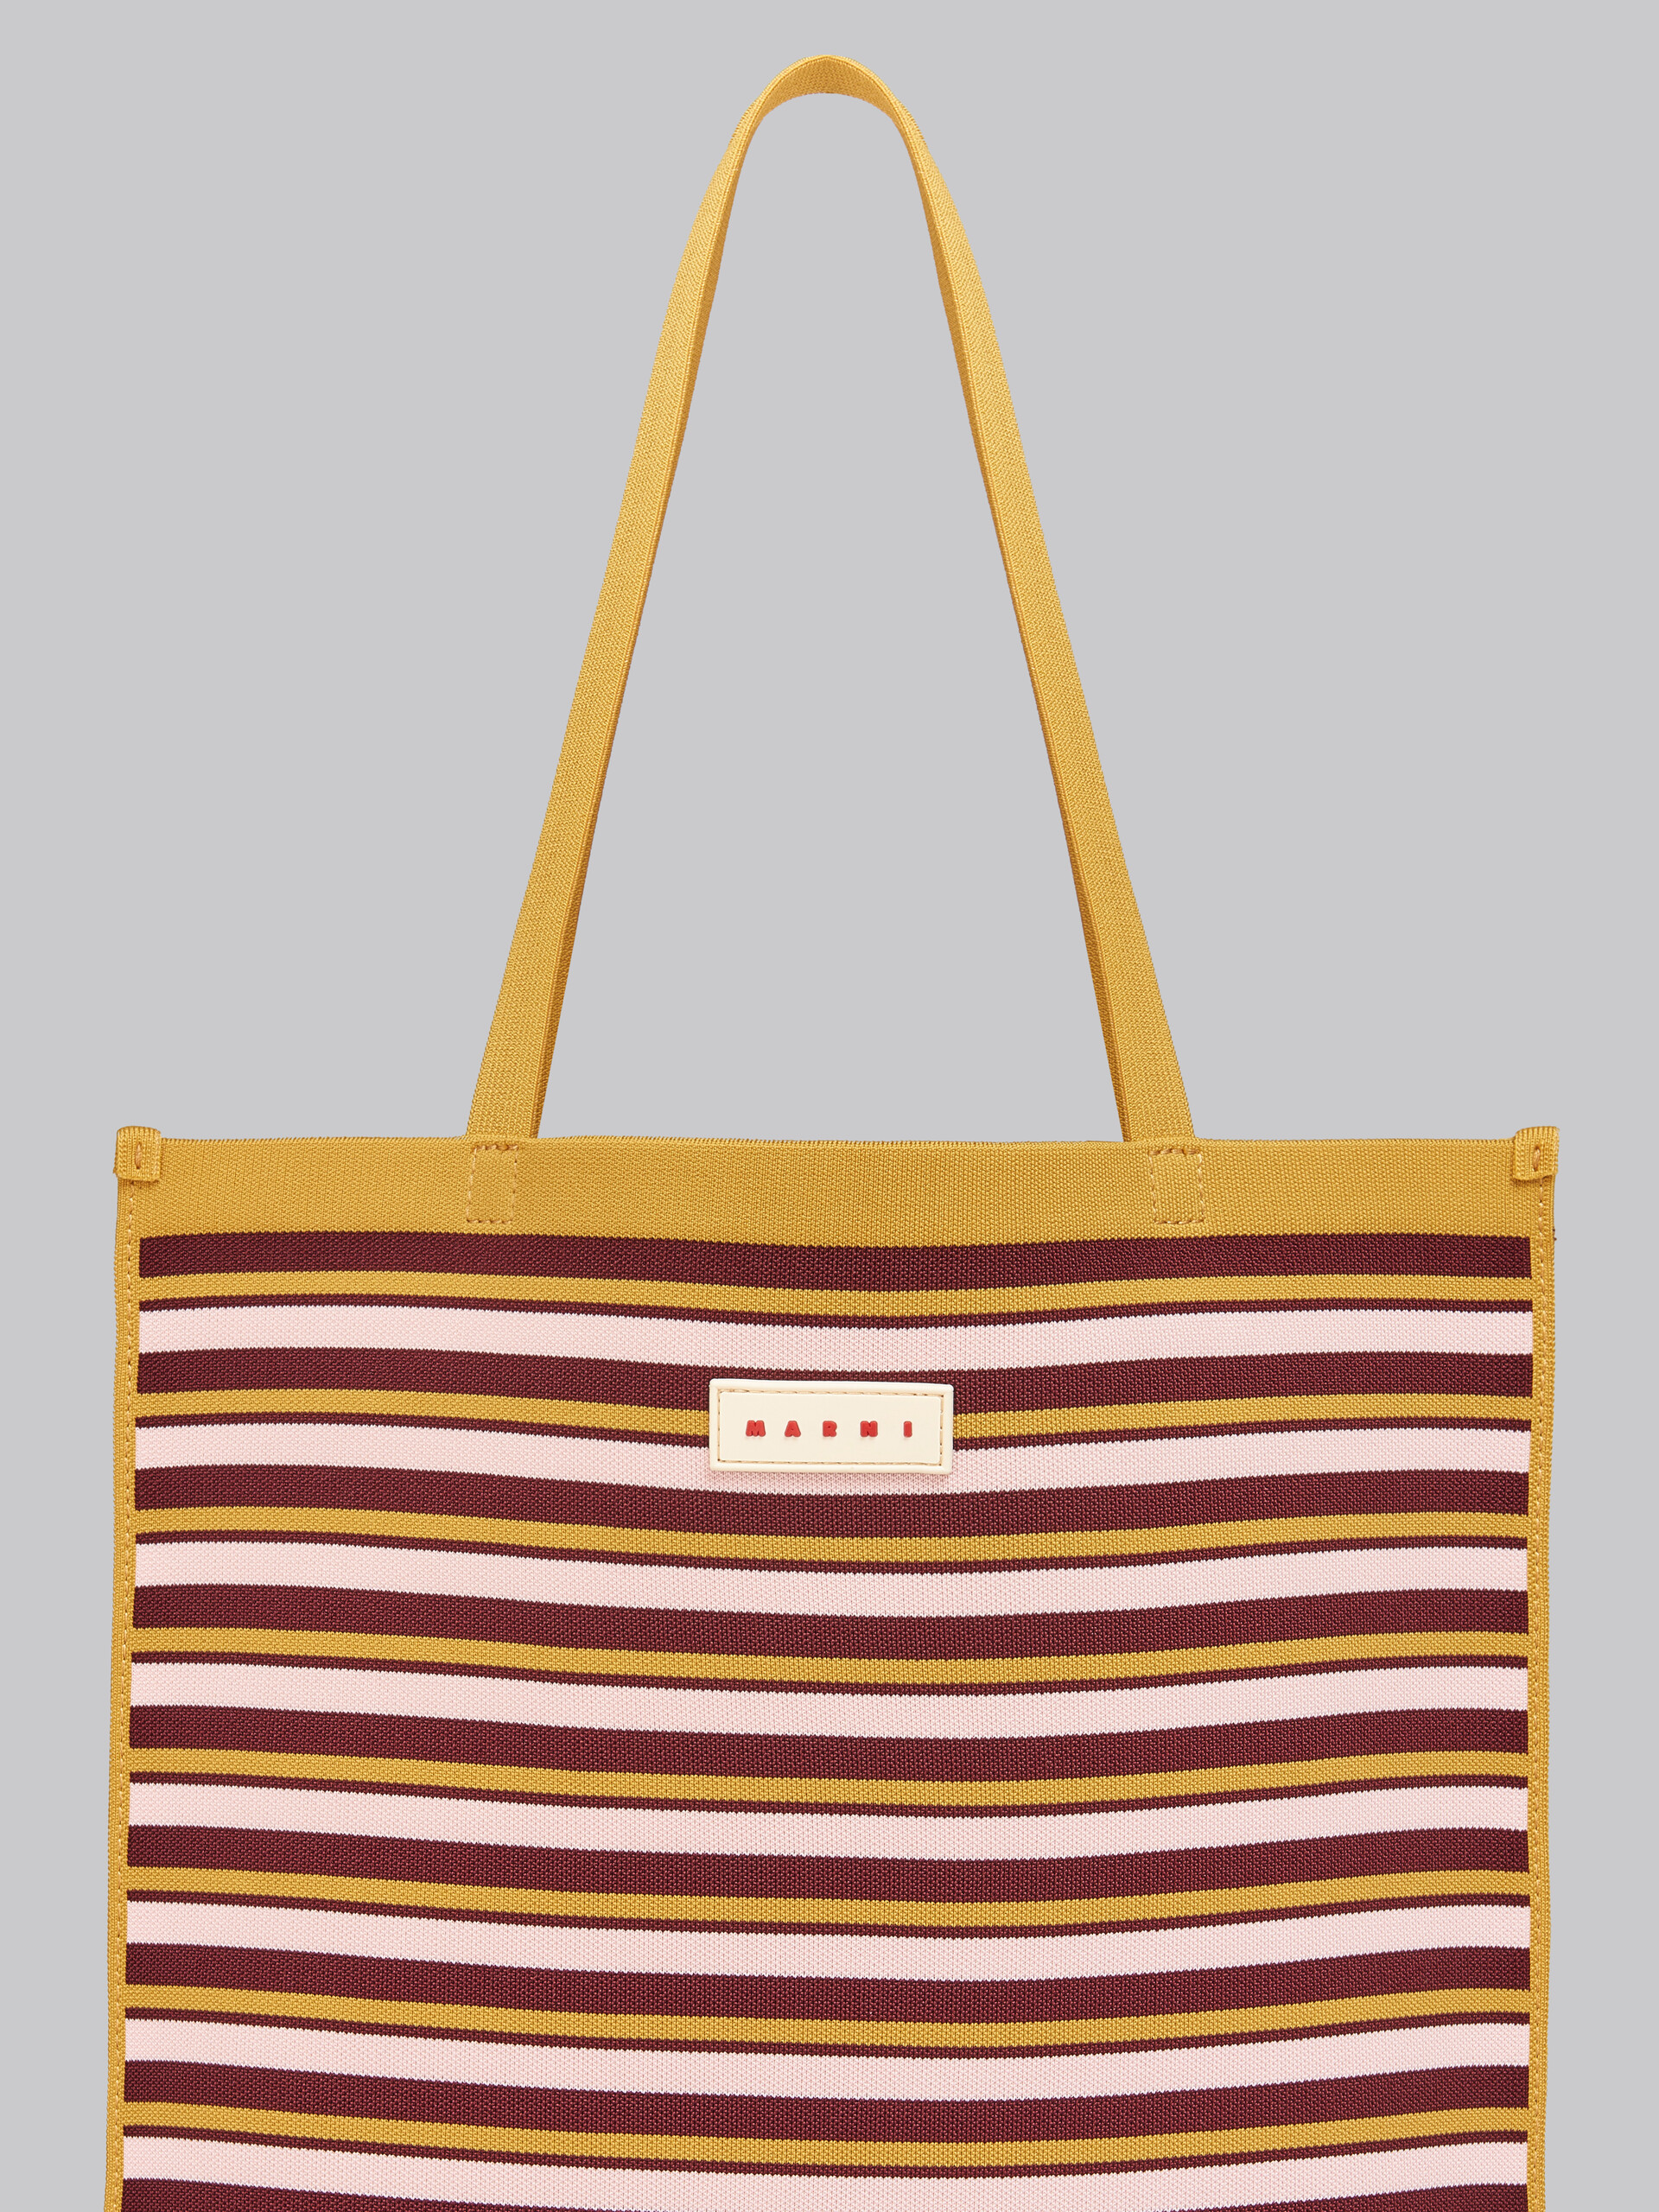 Navy white and red jacquard stripe flat tote bag - Shopping Bags - Image 5